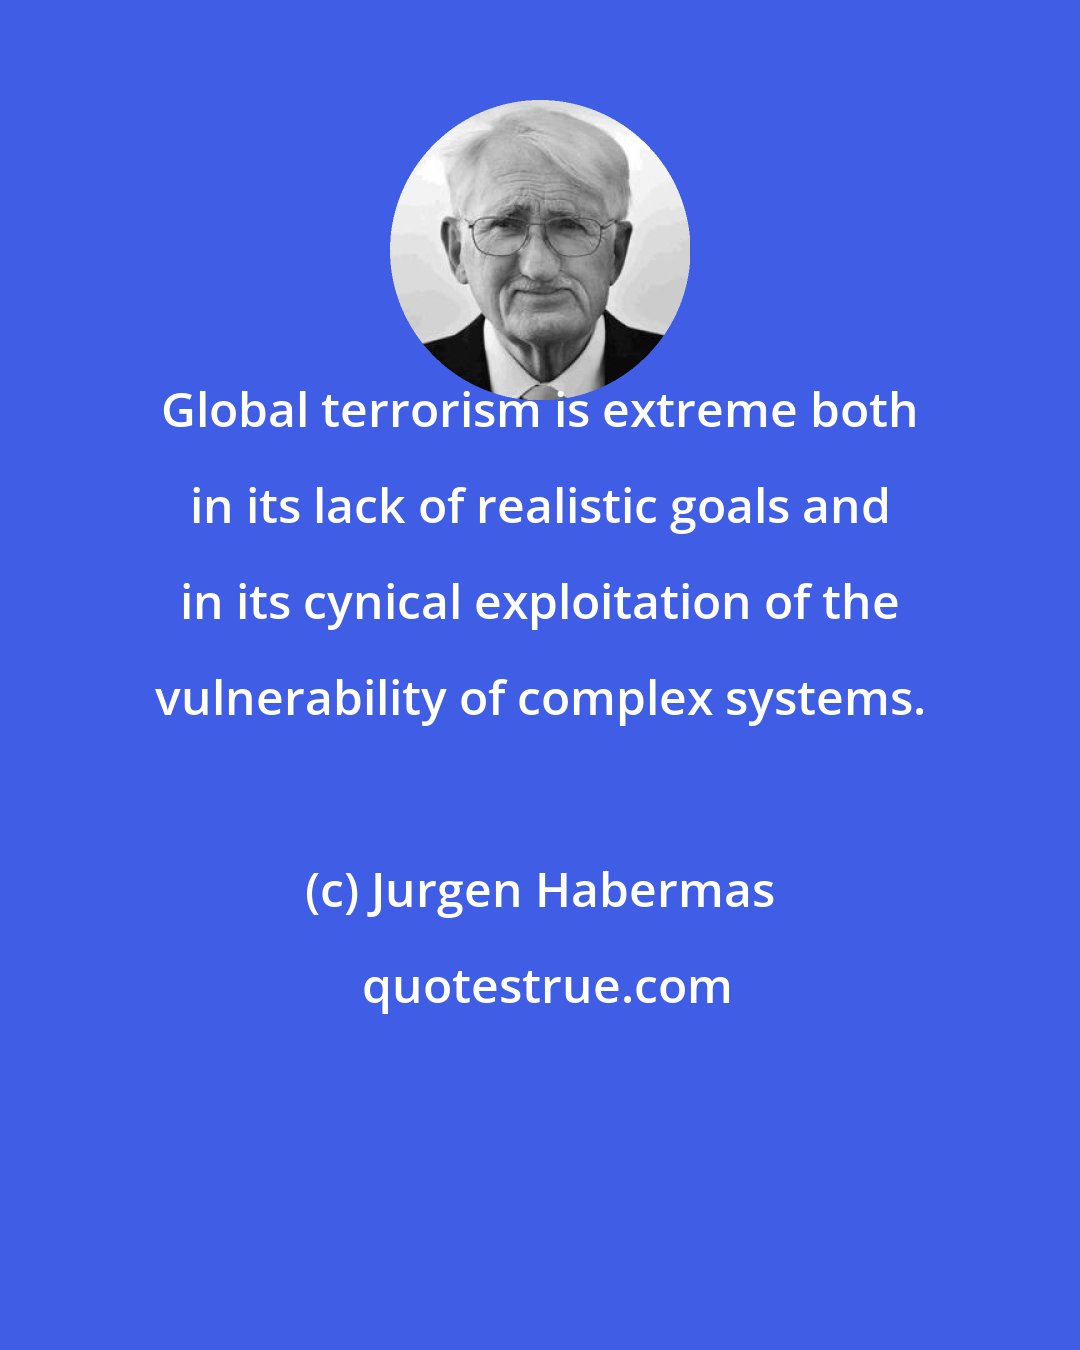 Jurgen Habermas: Global terrorism is extreme both in its lack of realistic goals and in its cynical exploitation of the vulnerability of complex systems.